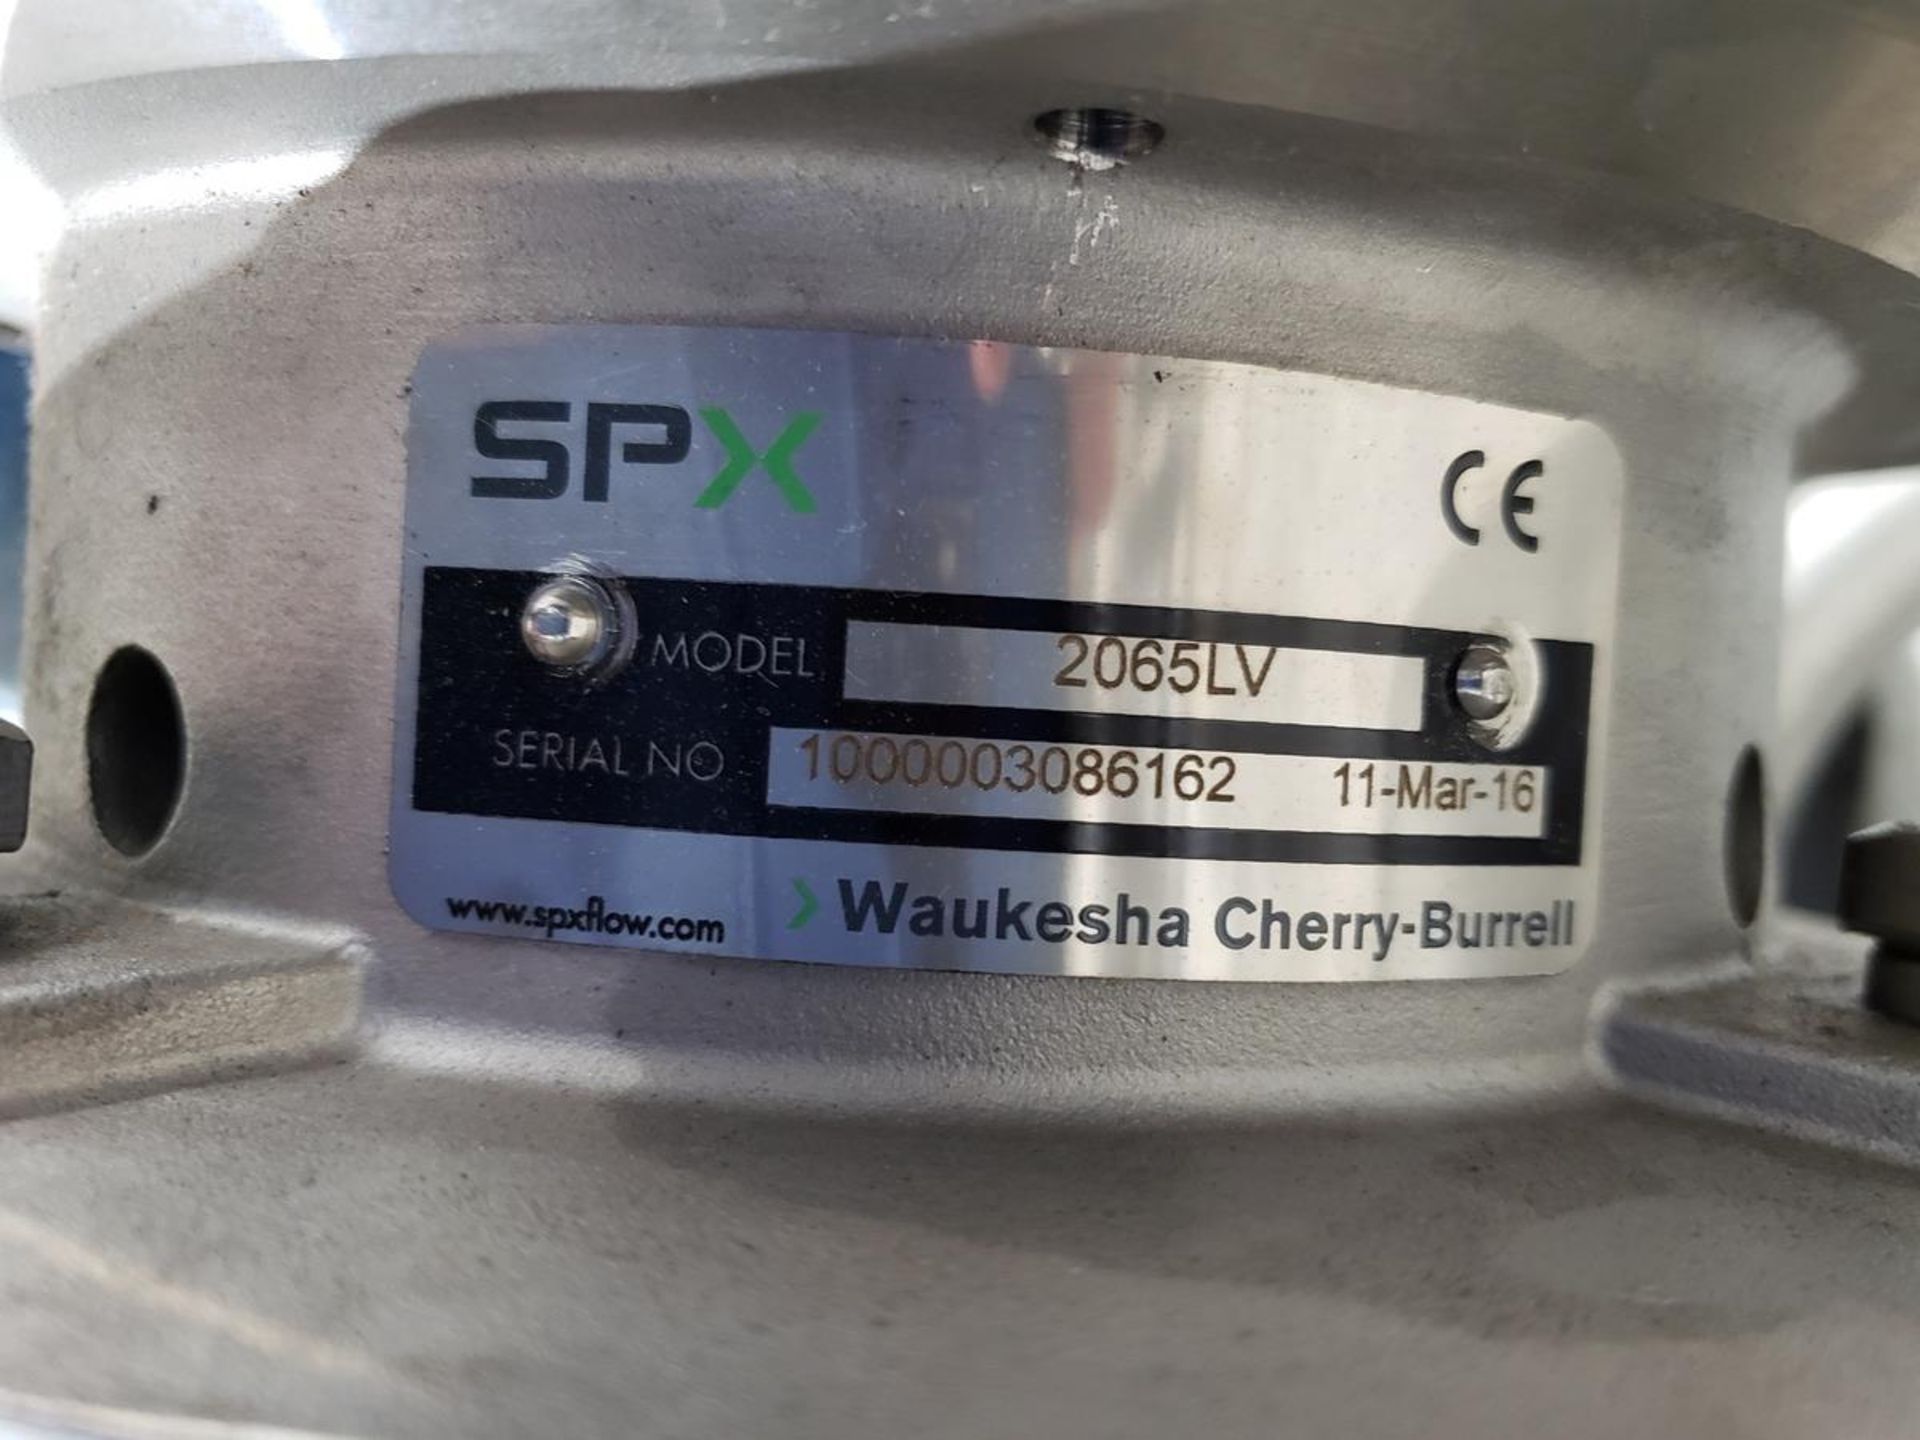 Waukesha Cherry-Burrell 7 1/2 HP Stainless Steel Centrifugal Pump, M# 2065LV, S/N 1 | Rig Fee: $25 - Image 2 of 3